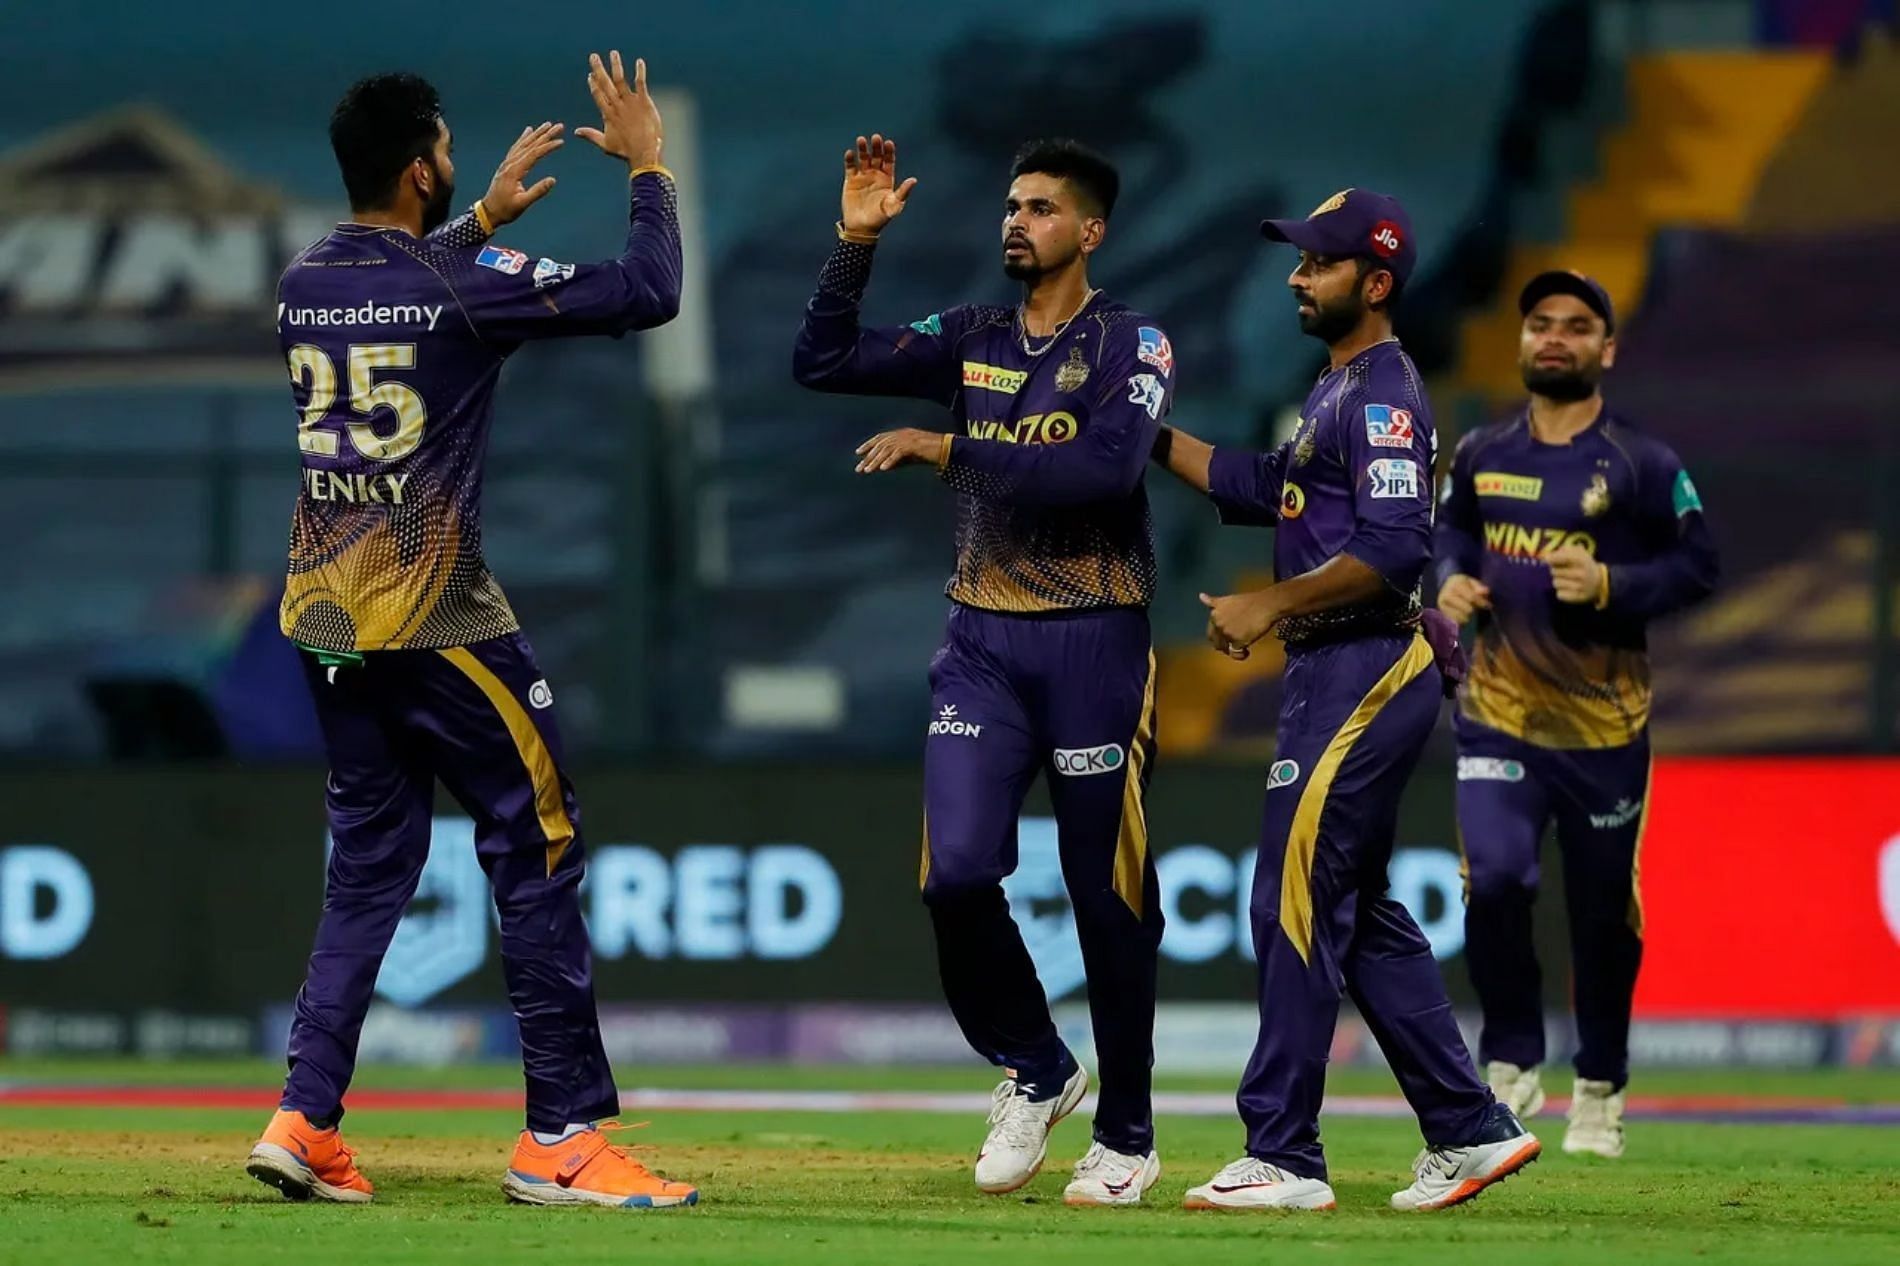 The Kolkata Knight Riders failed to qualify for the IPL 2022 playoffs. [P/C: iplt20,com]